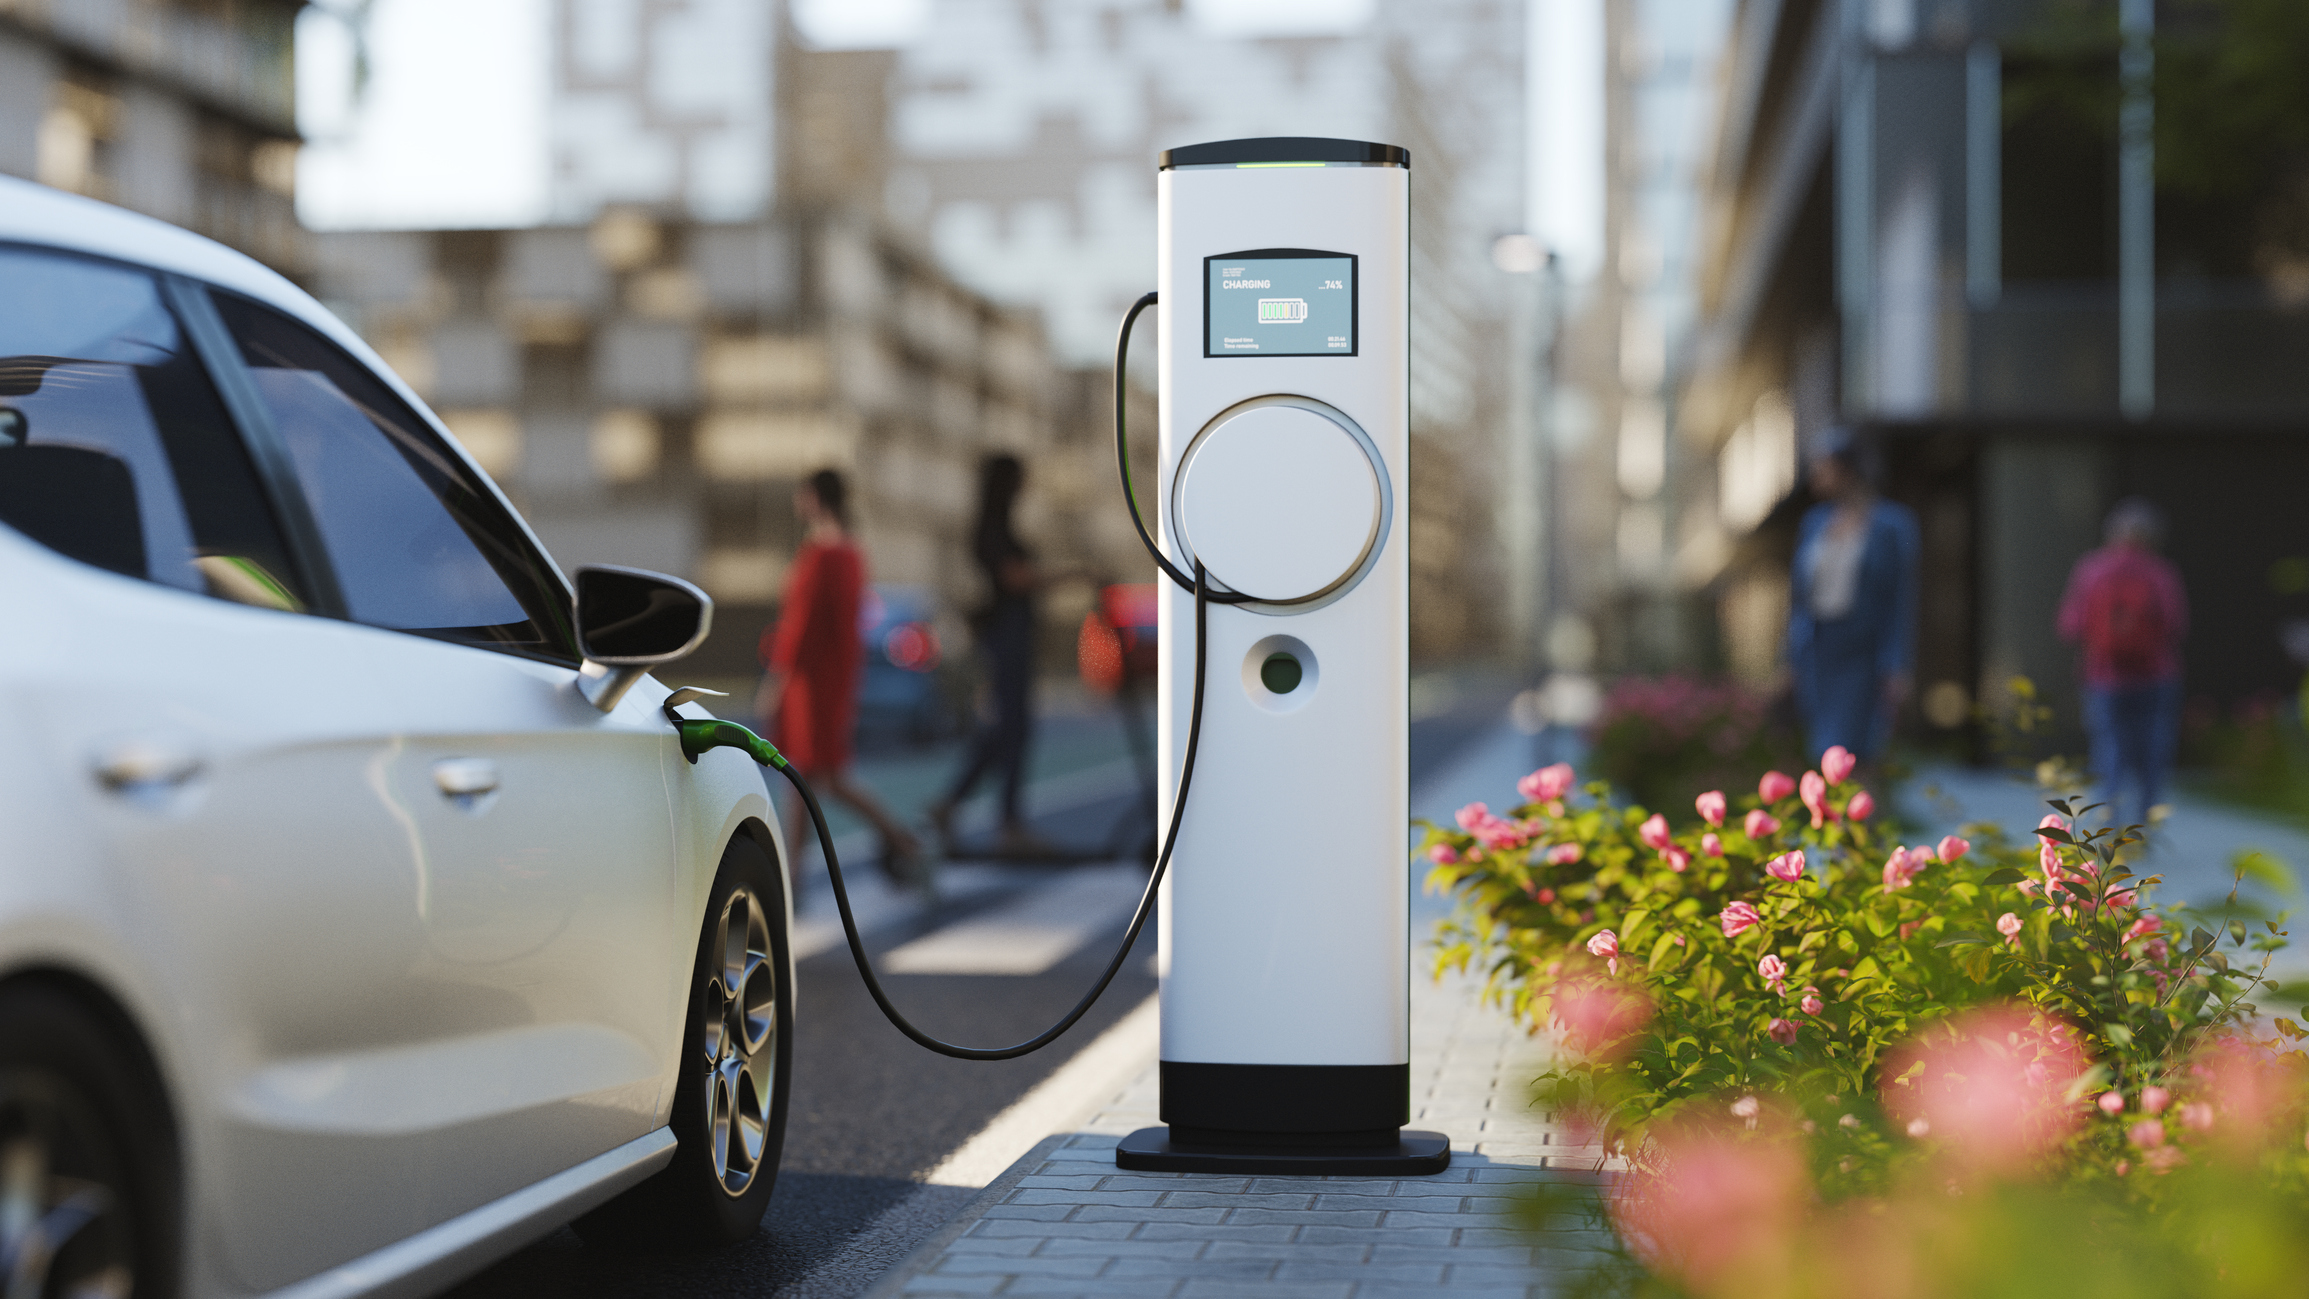 An electric vehicle at a charging station in the city. All items in the scene are 3D, charging station and concept cars are not based on any real ones.